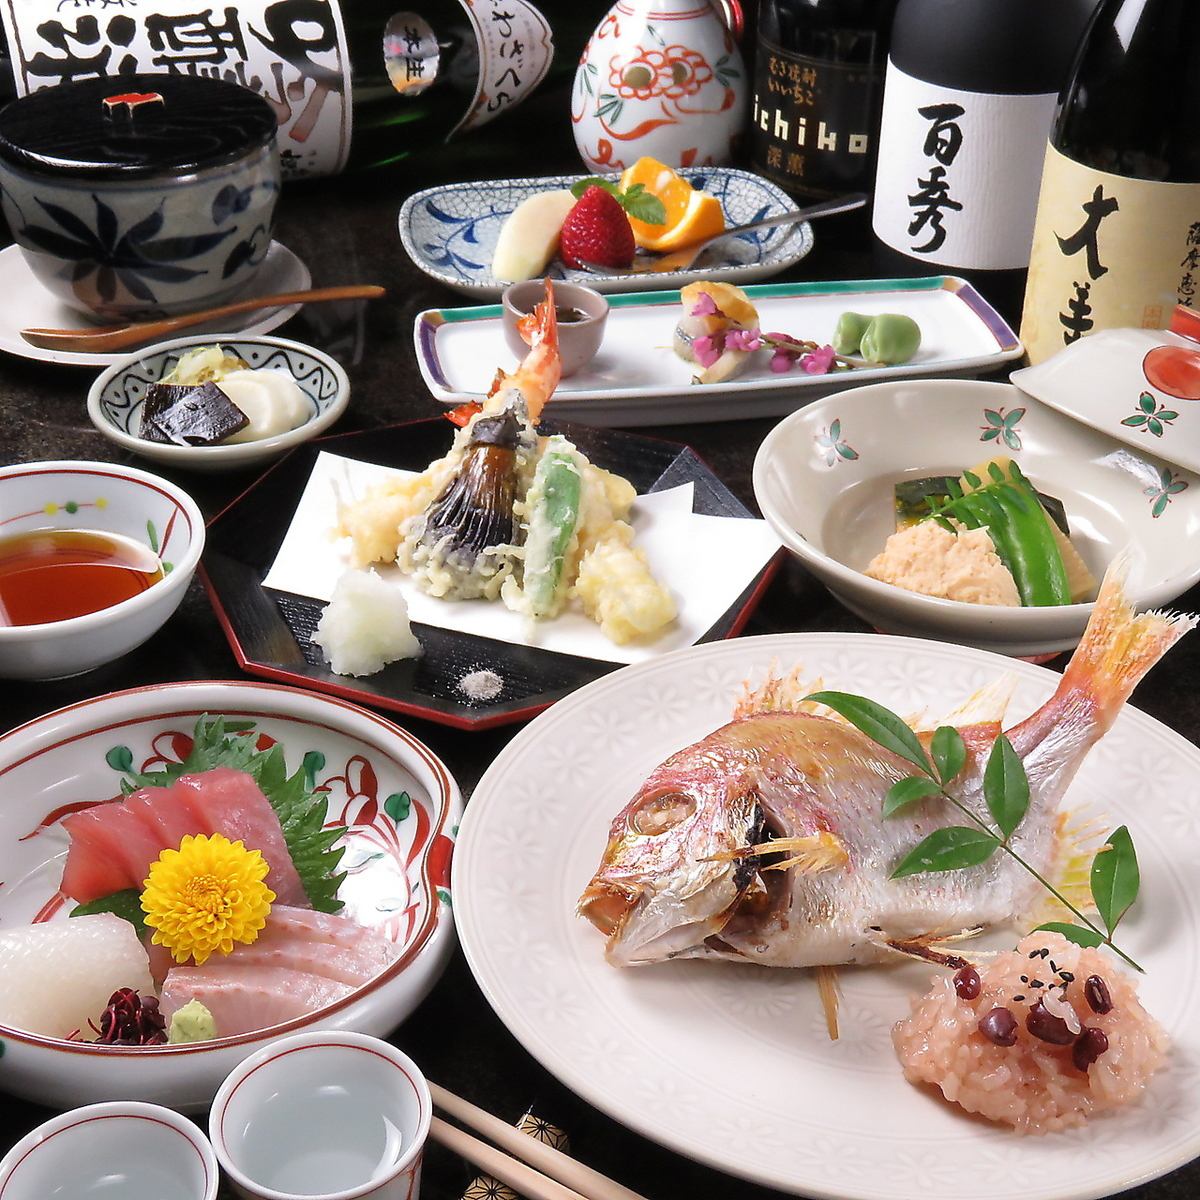 Zosui specialty store & seasonal kaiseki restaurant.Come and have a banquet / date in various completely private rooms according to the number of people!